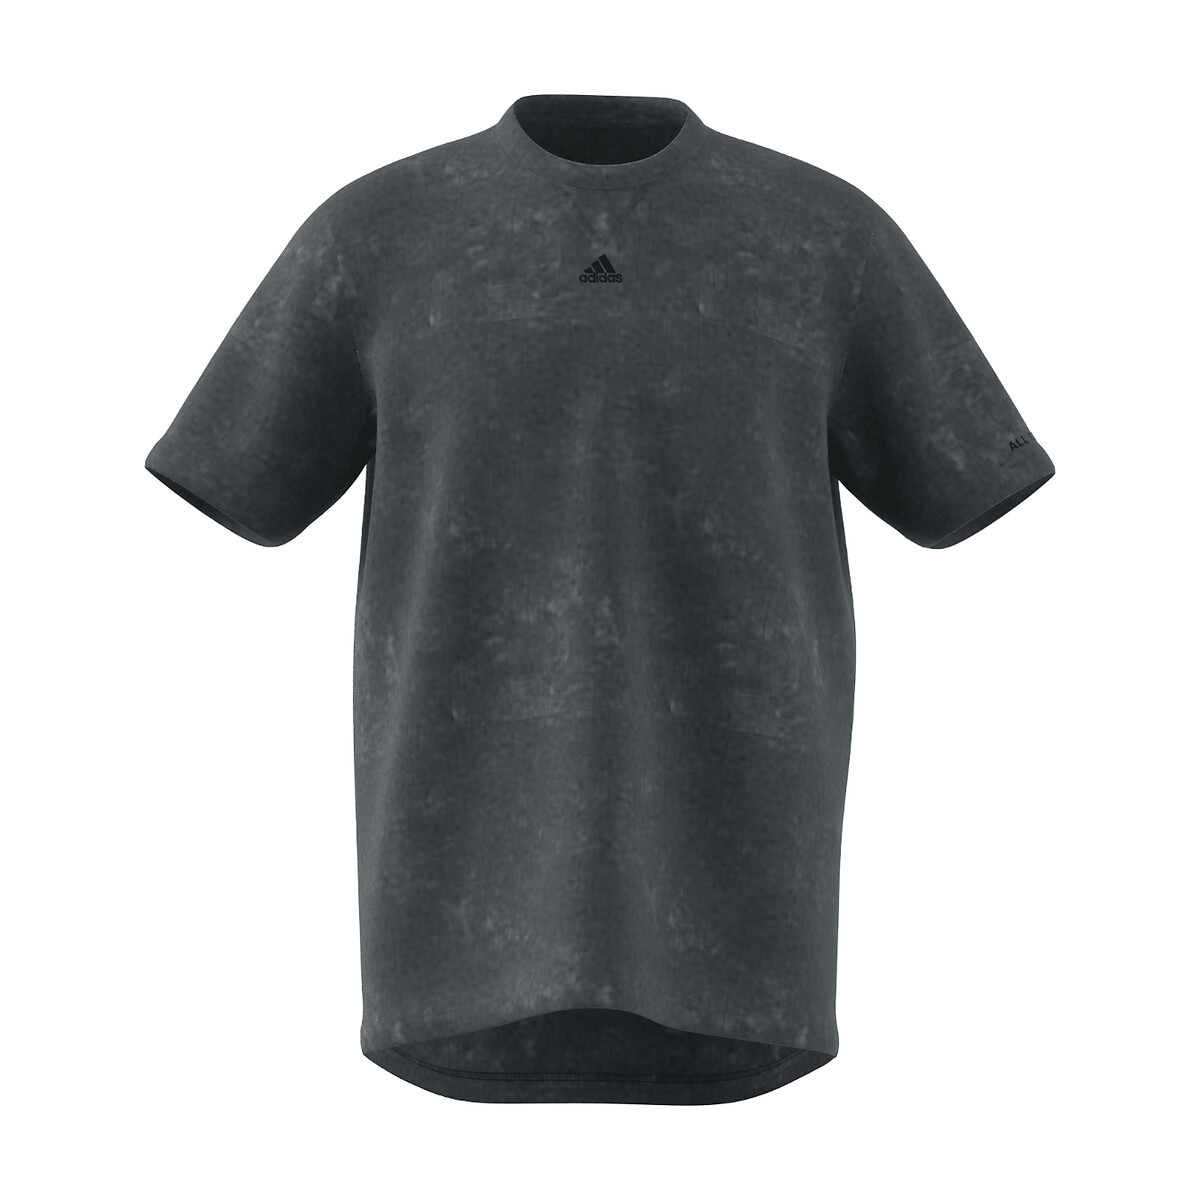 Washed Effect Cotton T-Shirt with Short Sleeves